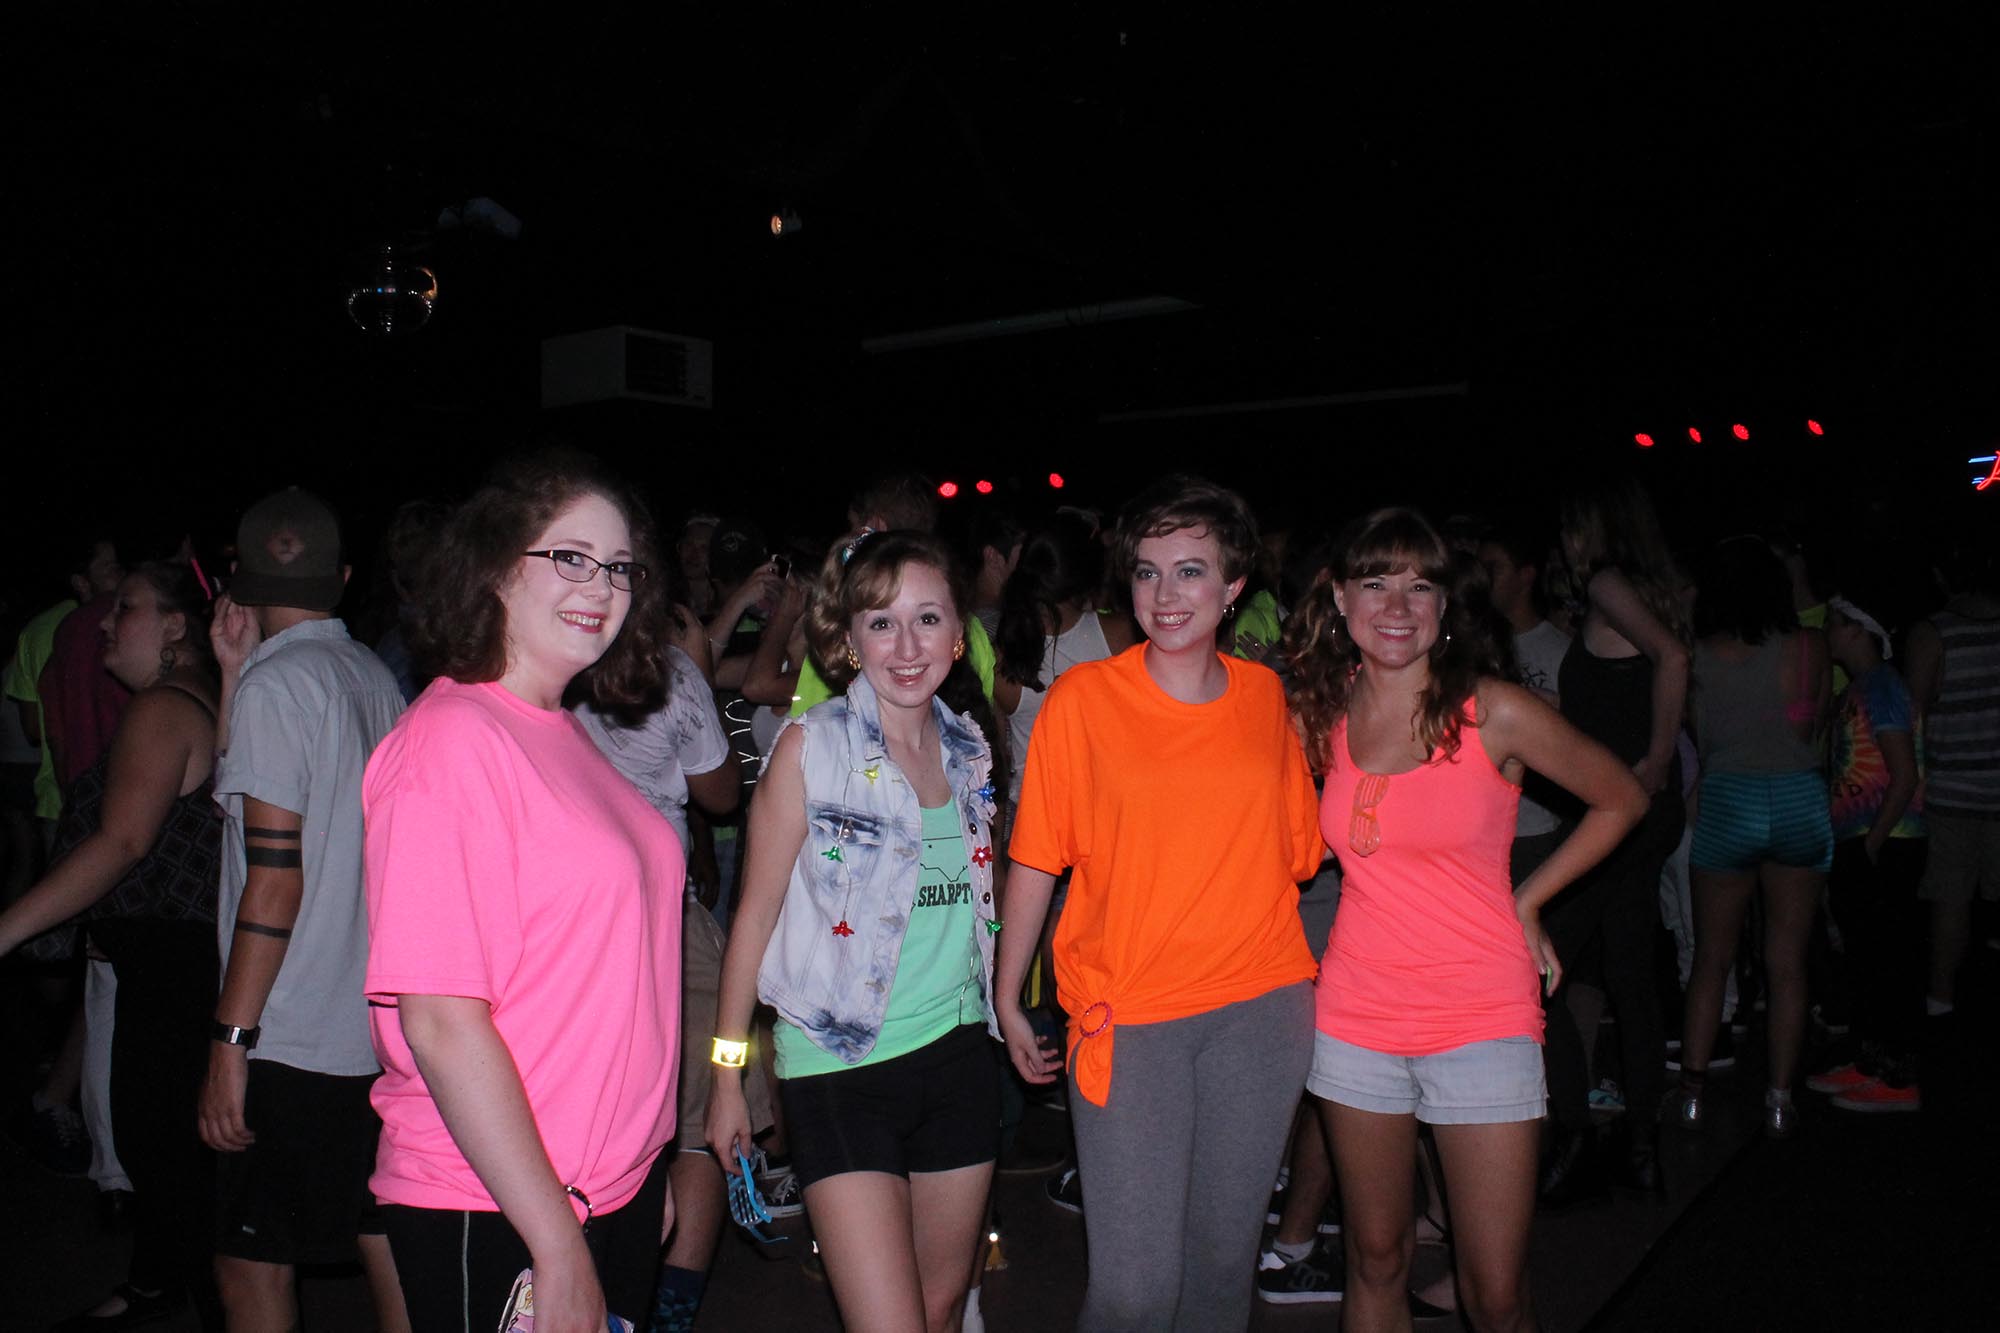 Students Cheyenne Grubbs, Ashlynn Whitesell, Rebecca Summey, and Adrienne Fouts pose for a picture a the Glow Party on Saturday night, August 22nd. The party was held at Legends and it was in honor of the new semester starting.